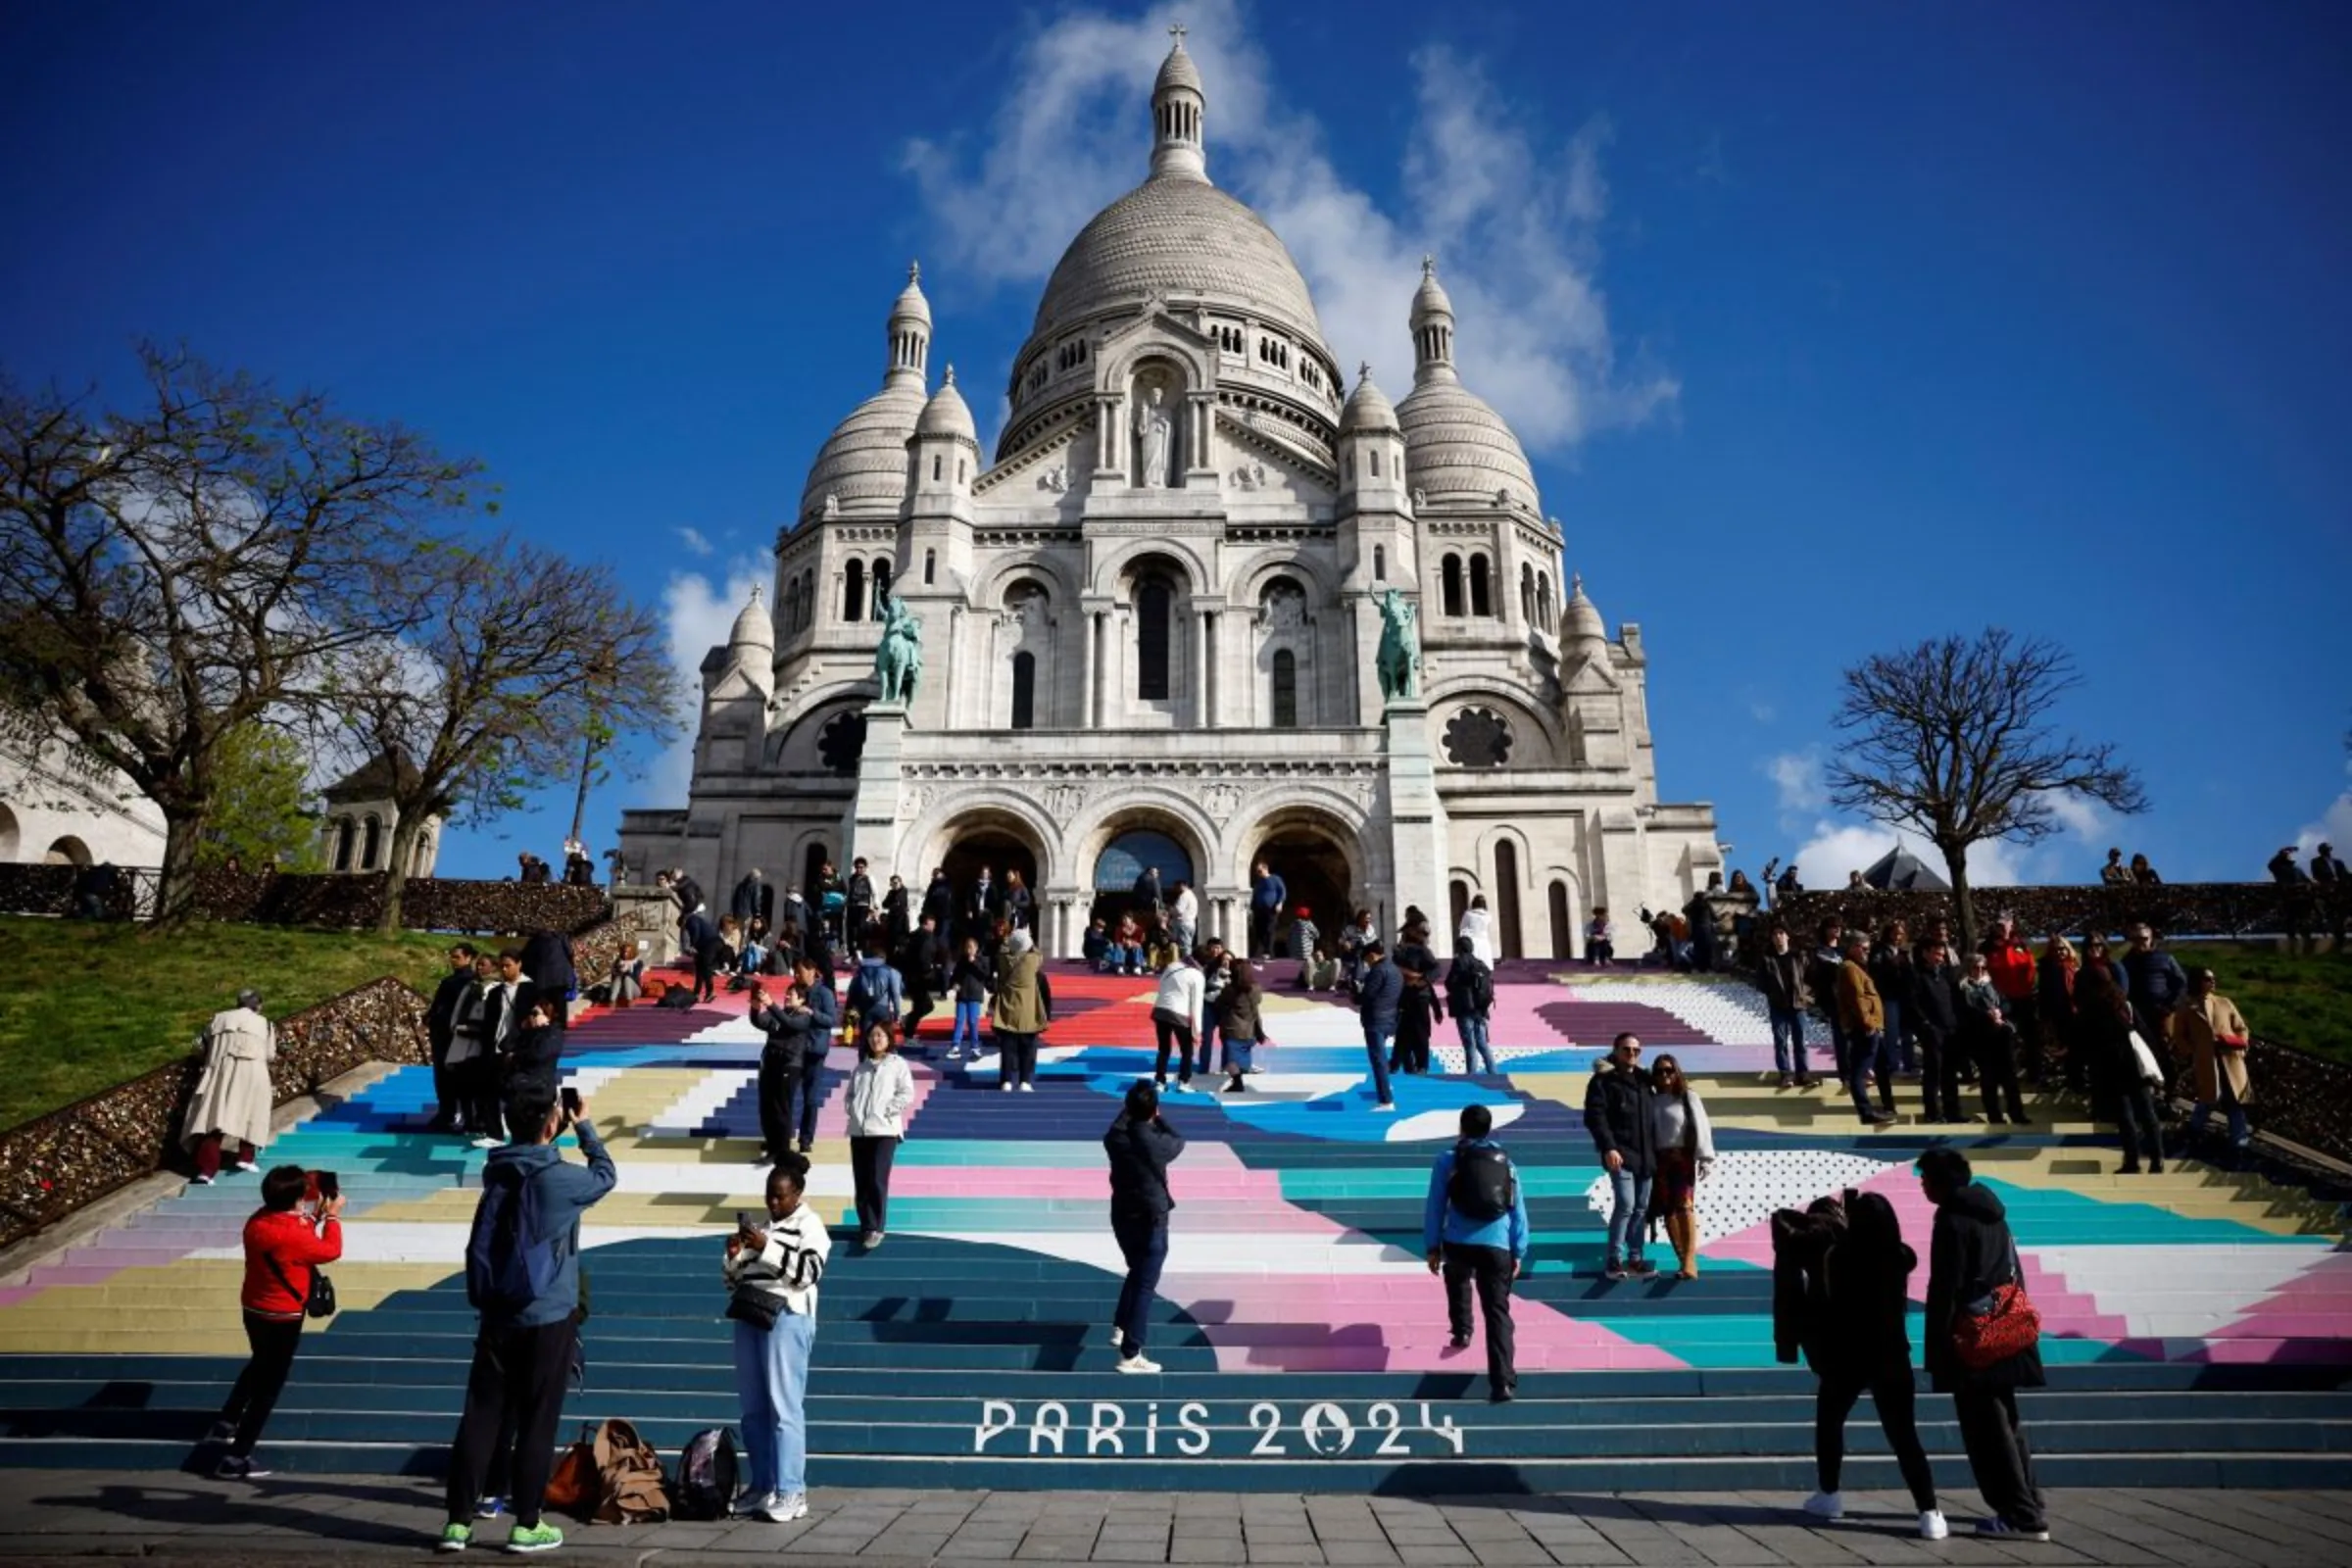 Tourists stand on the Sacre-Coeur Basilica stairs painted with the Paris 2024 Olympic and Paralympic Games design at the Butte Montmartre in Paris, France, April 17, 2024. REUTERS/Sarah Meyssonnier